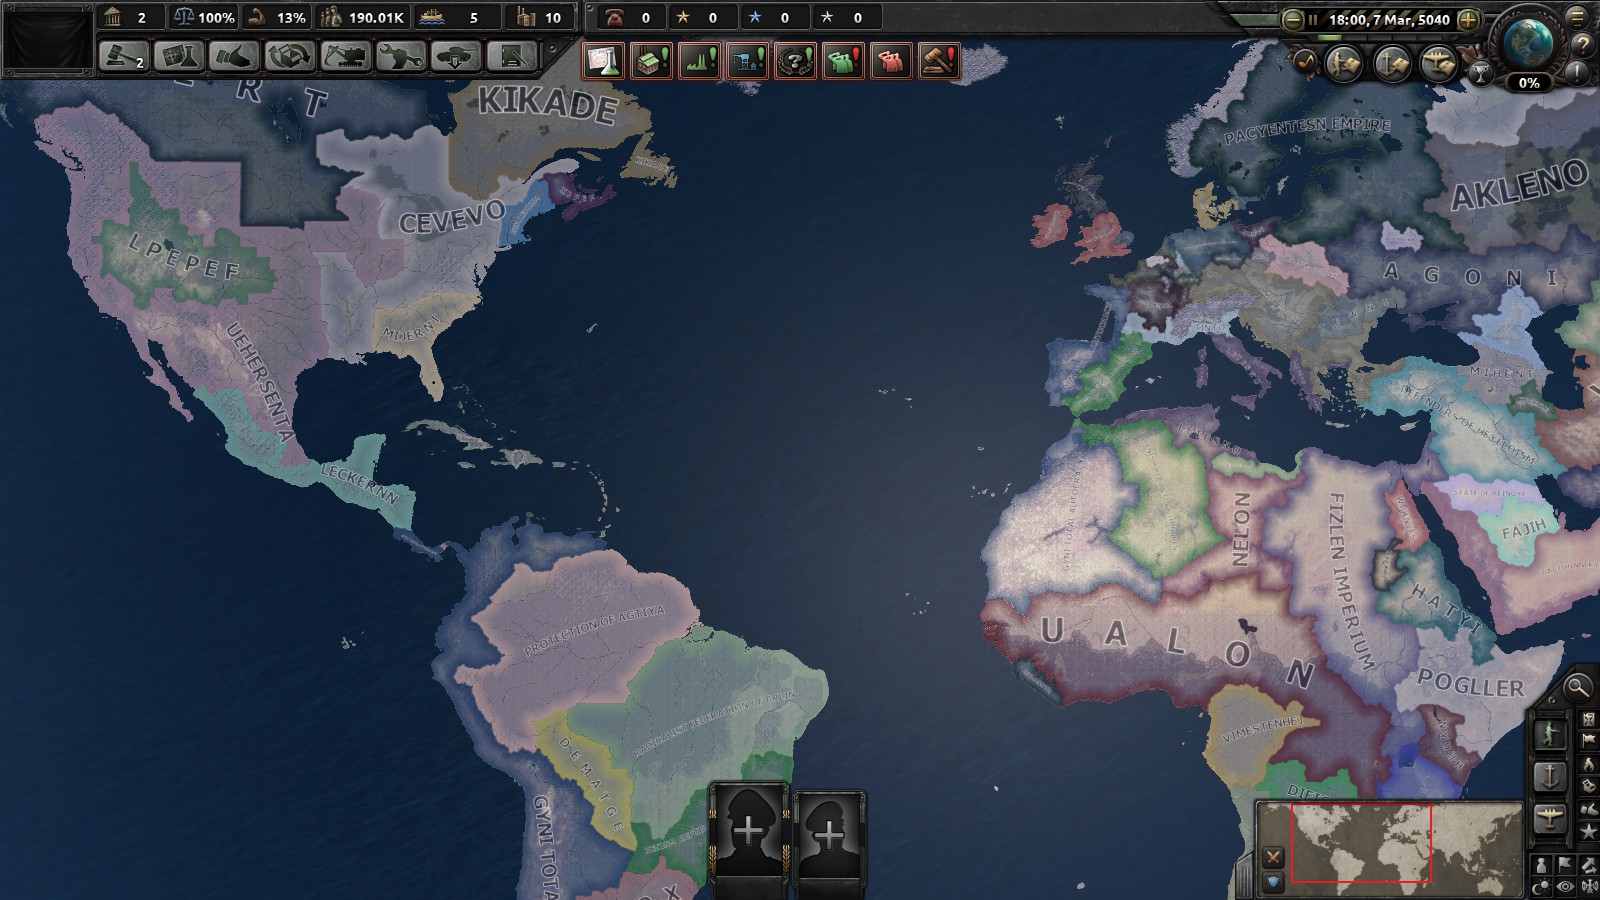 World of iron 4. Hearts of Iron IV Map. Hearts of Iron 2 карта. Карта Hearts of Iron 4 1936.